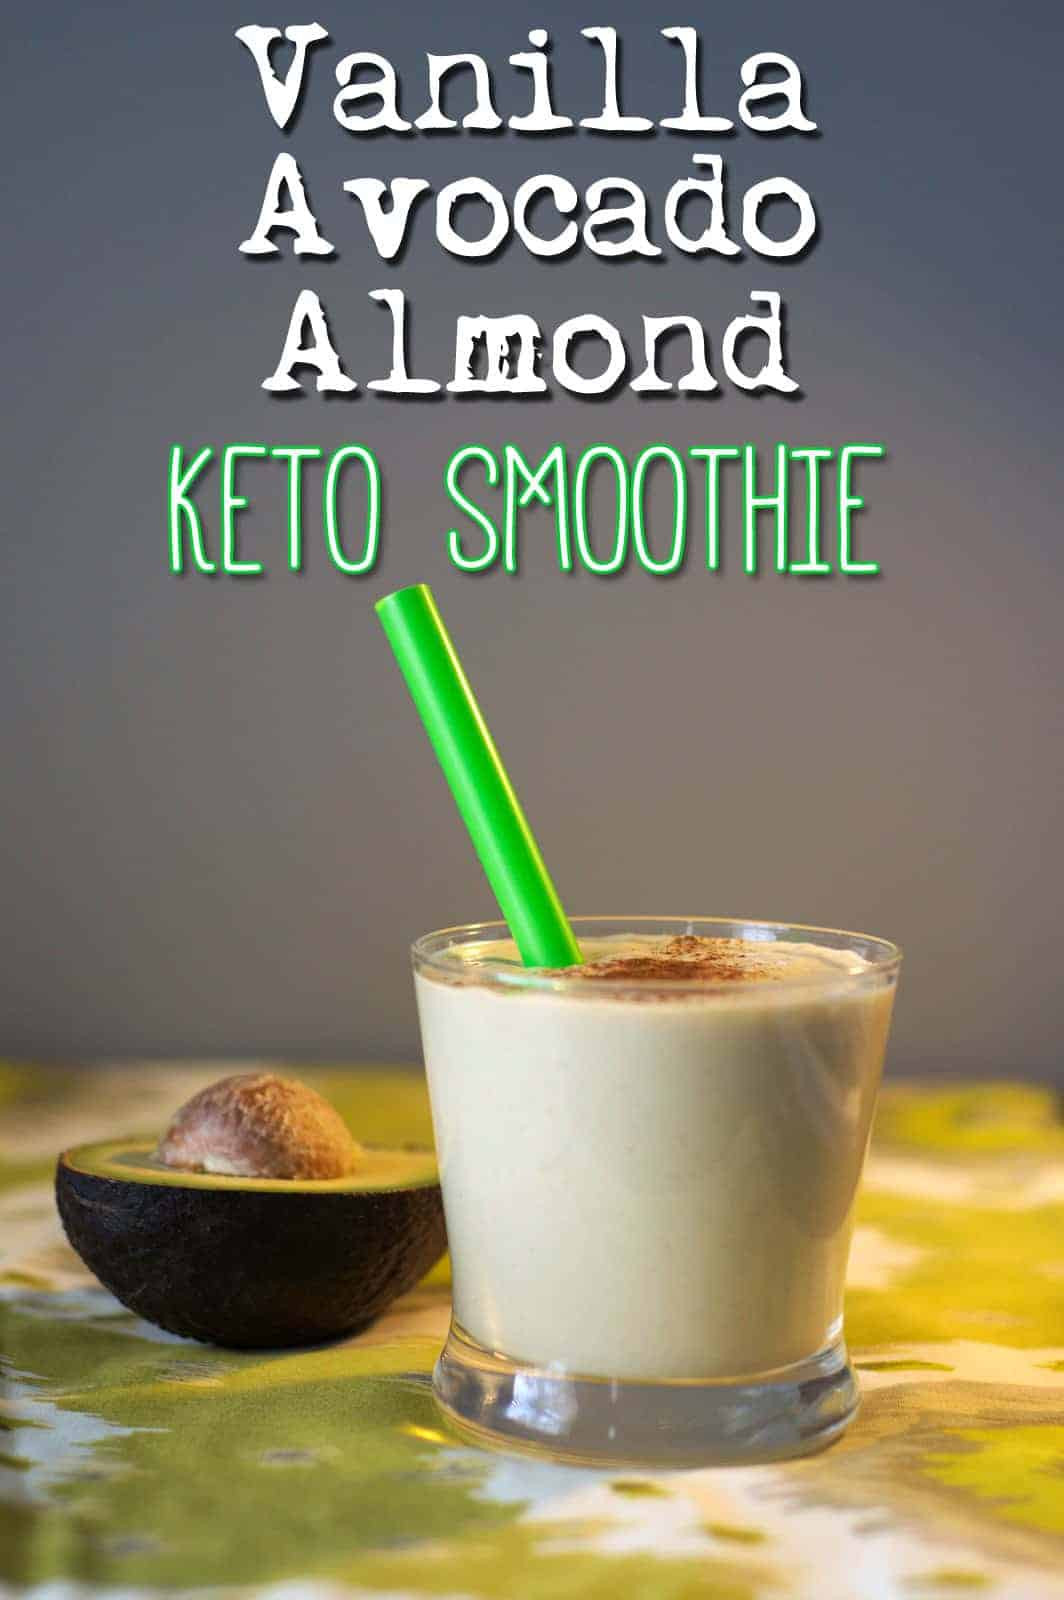 Low Carb Breakfast Smoothies
 50 Best Low Carb Smoothie Recipes for 2018